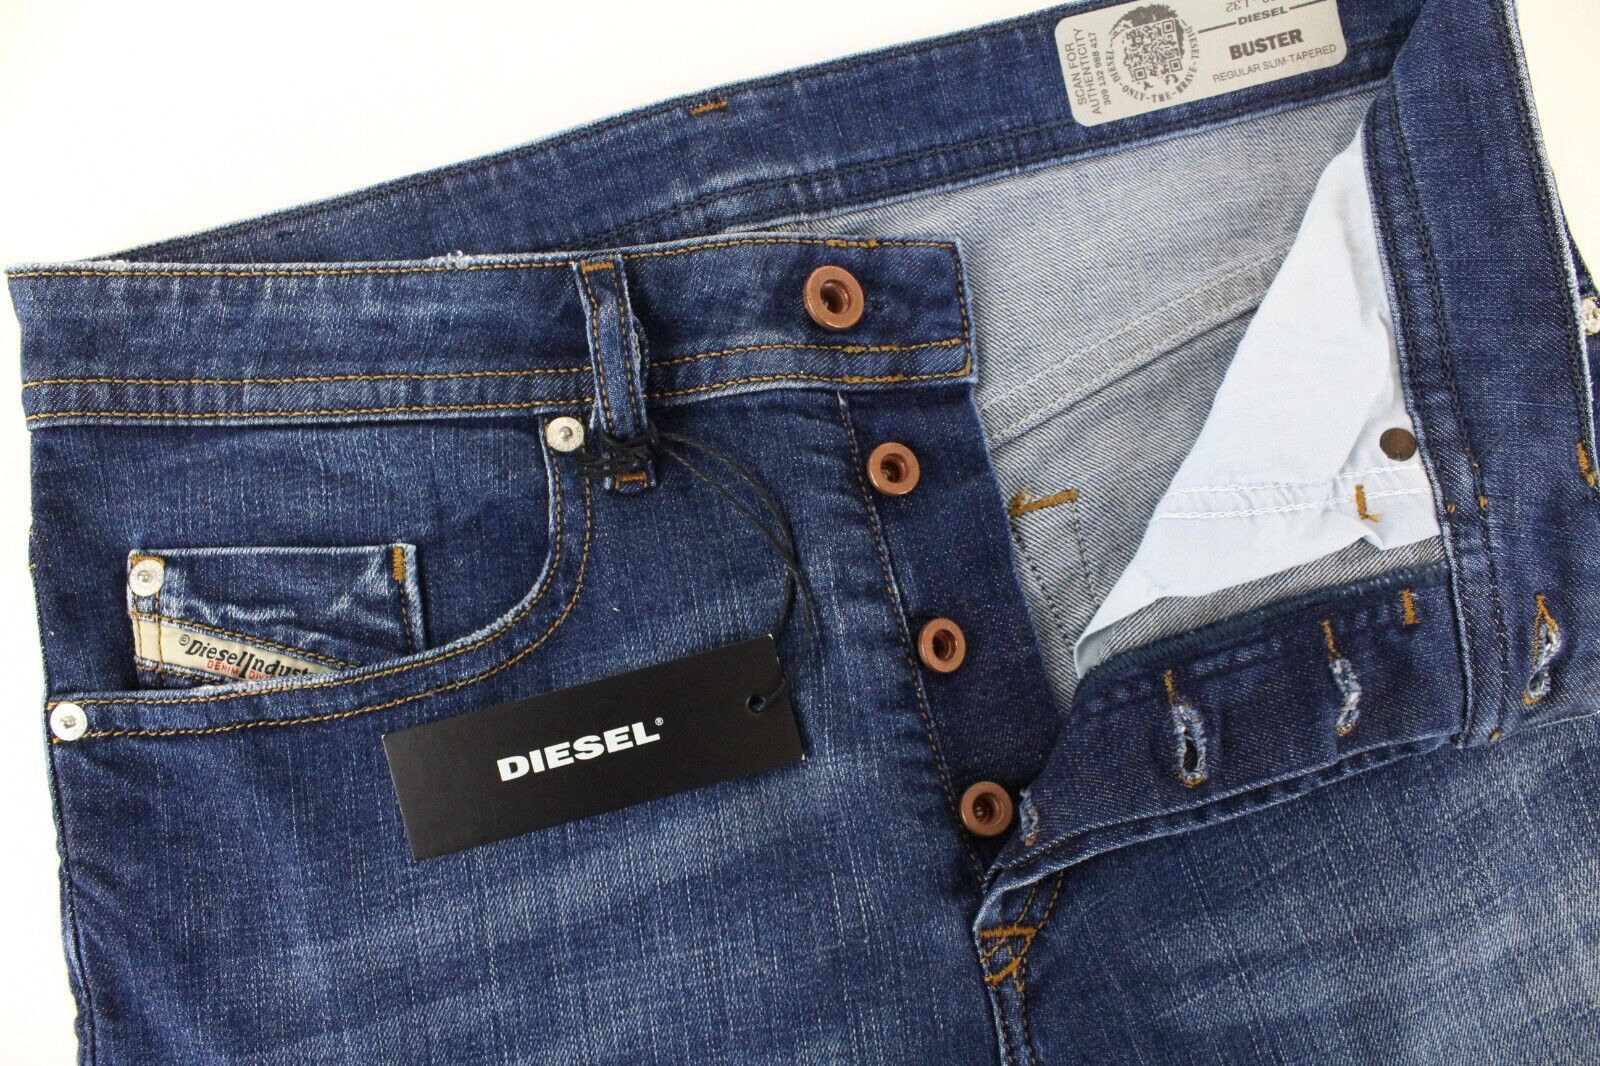 Buster Blue Trouser Jeans